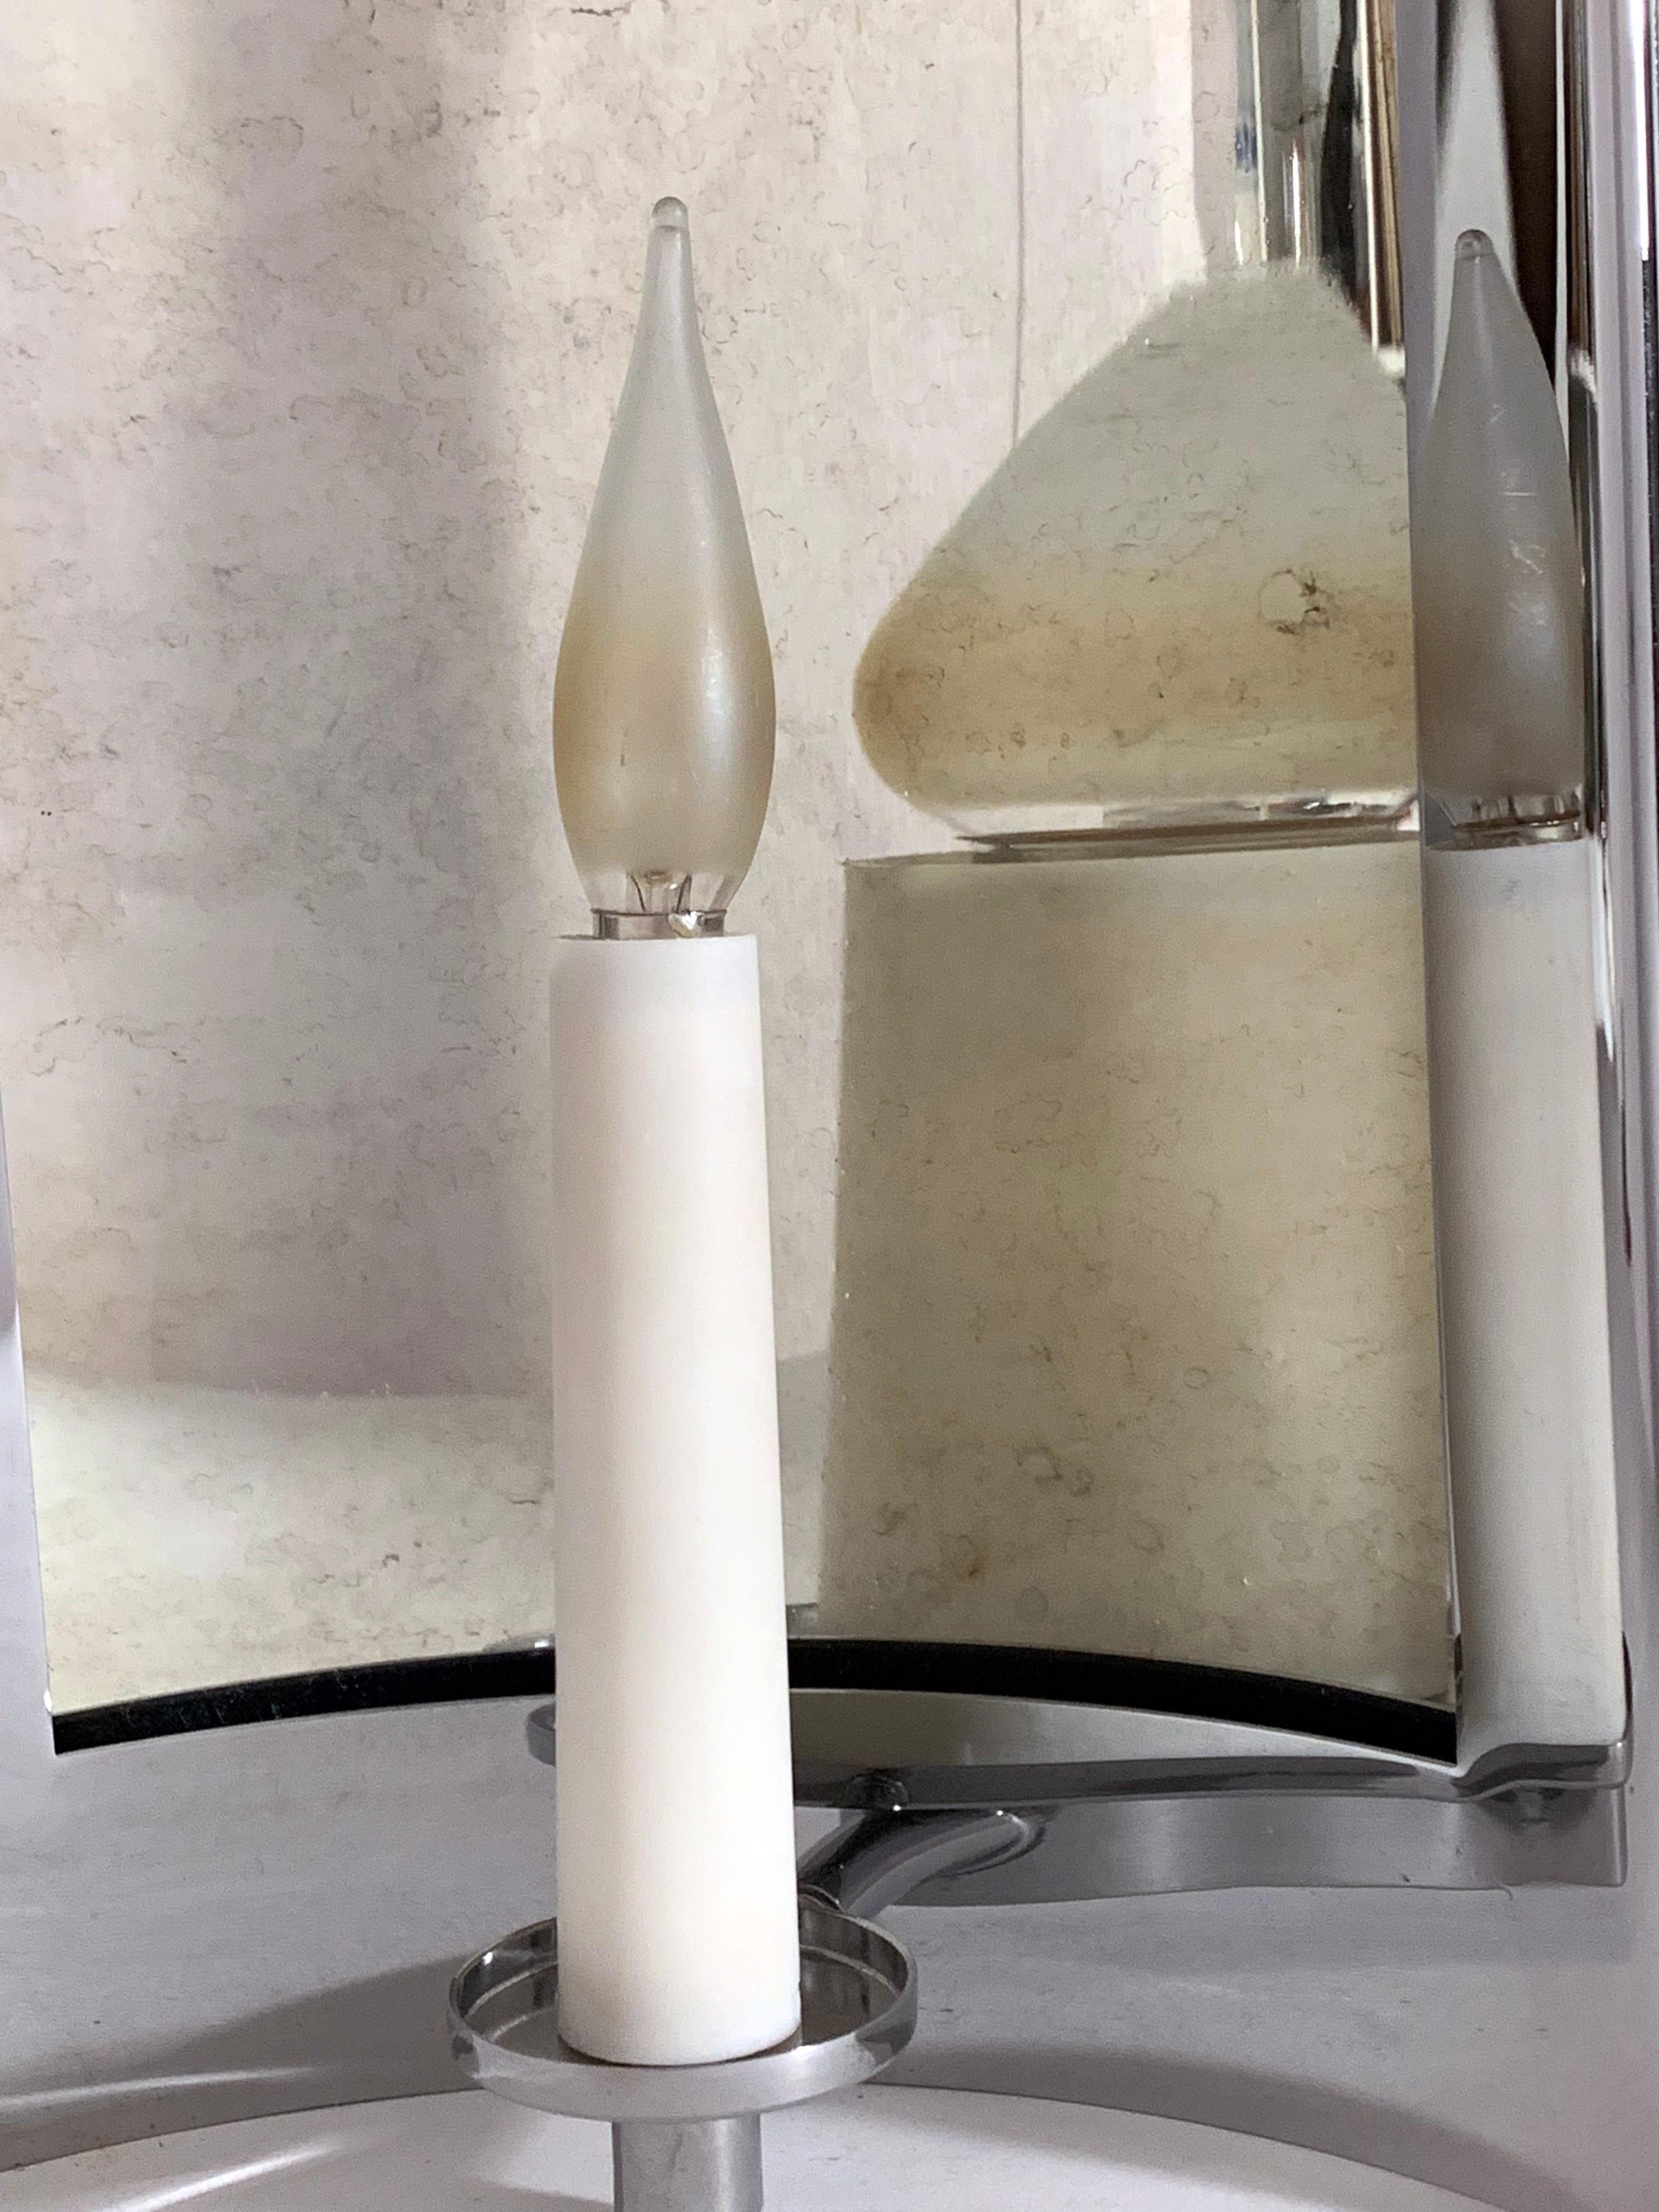 Original prototype.
A curved antiqued-mirror reflector set in a nickel frame with candle. 
Mirror magnifies the candle and bulb.
Made in Italy.